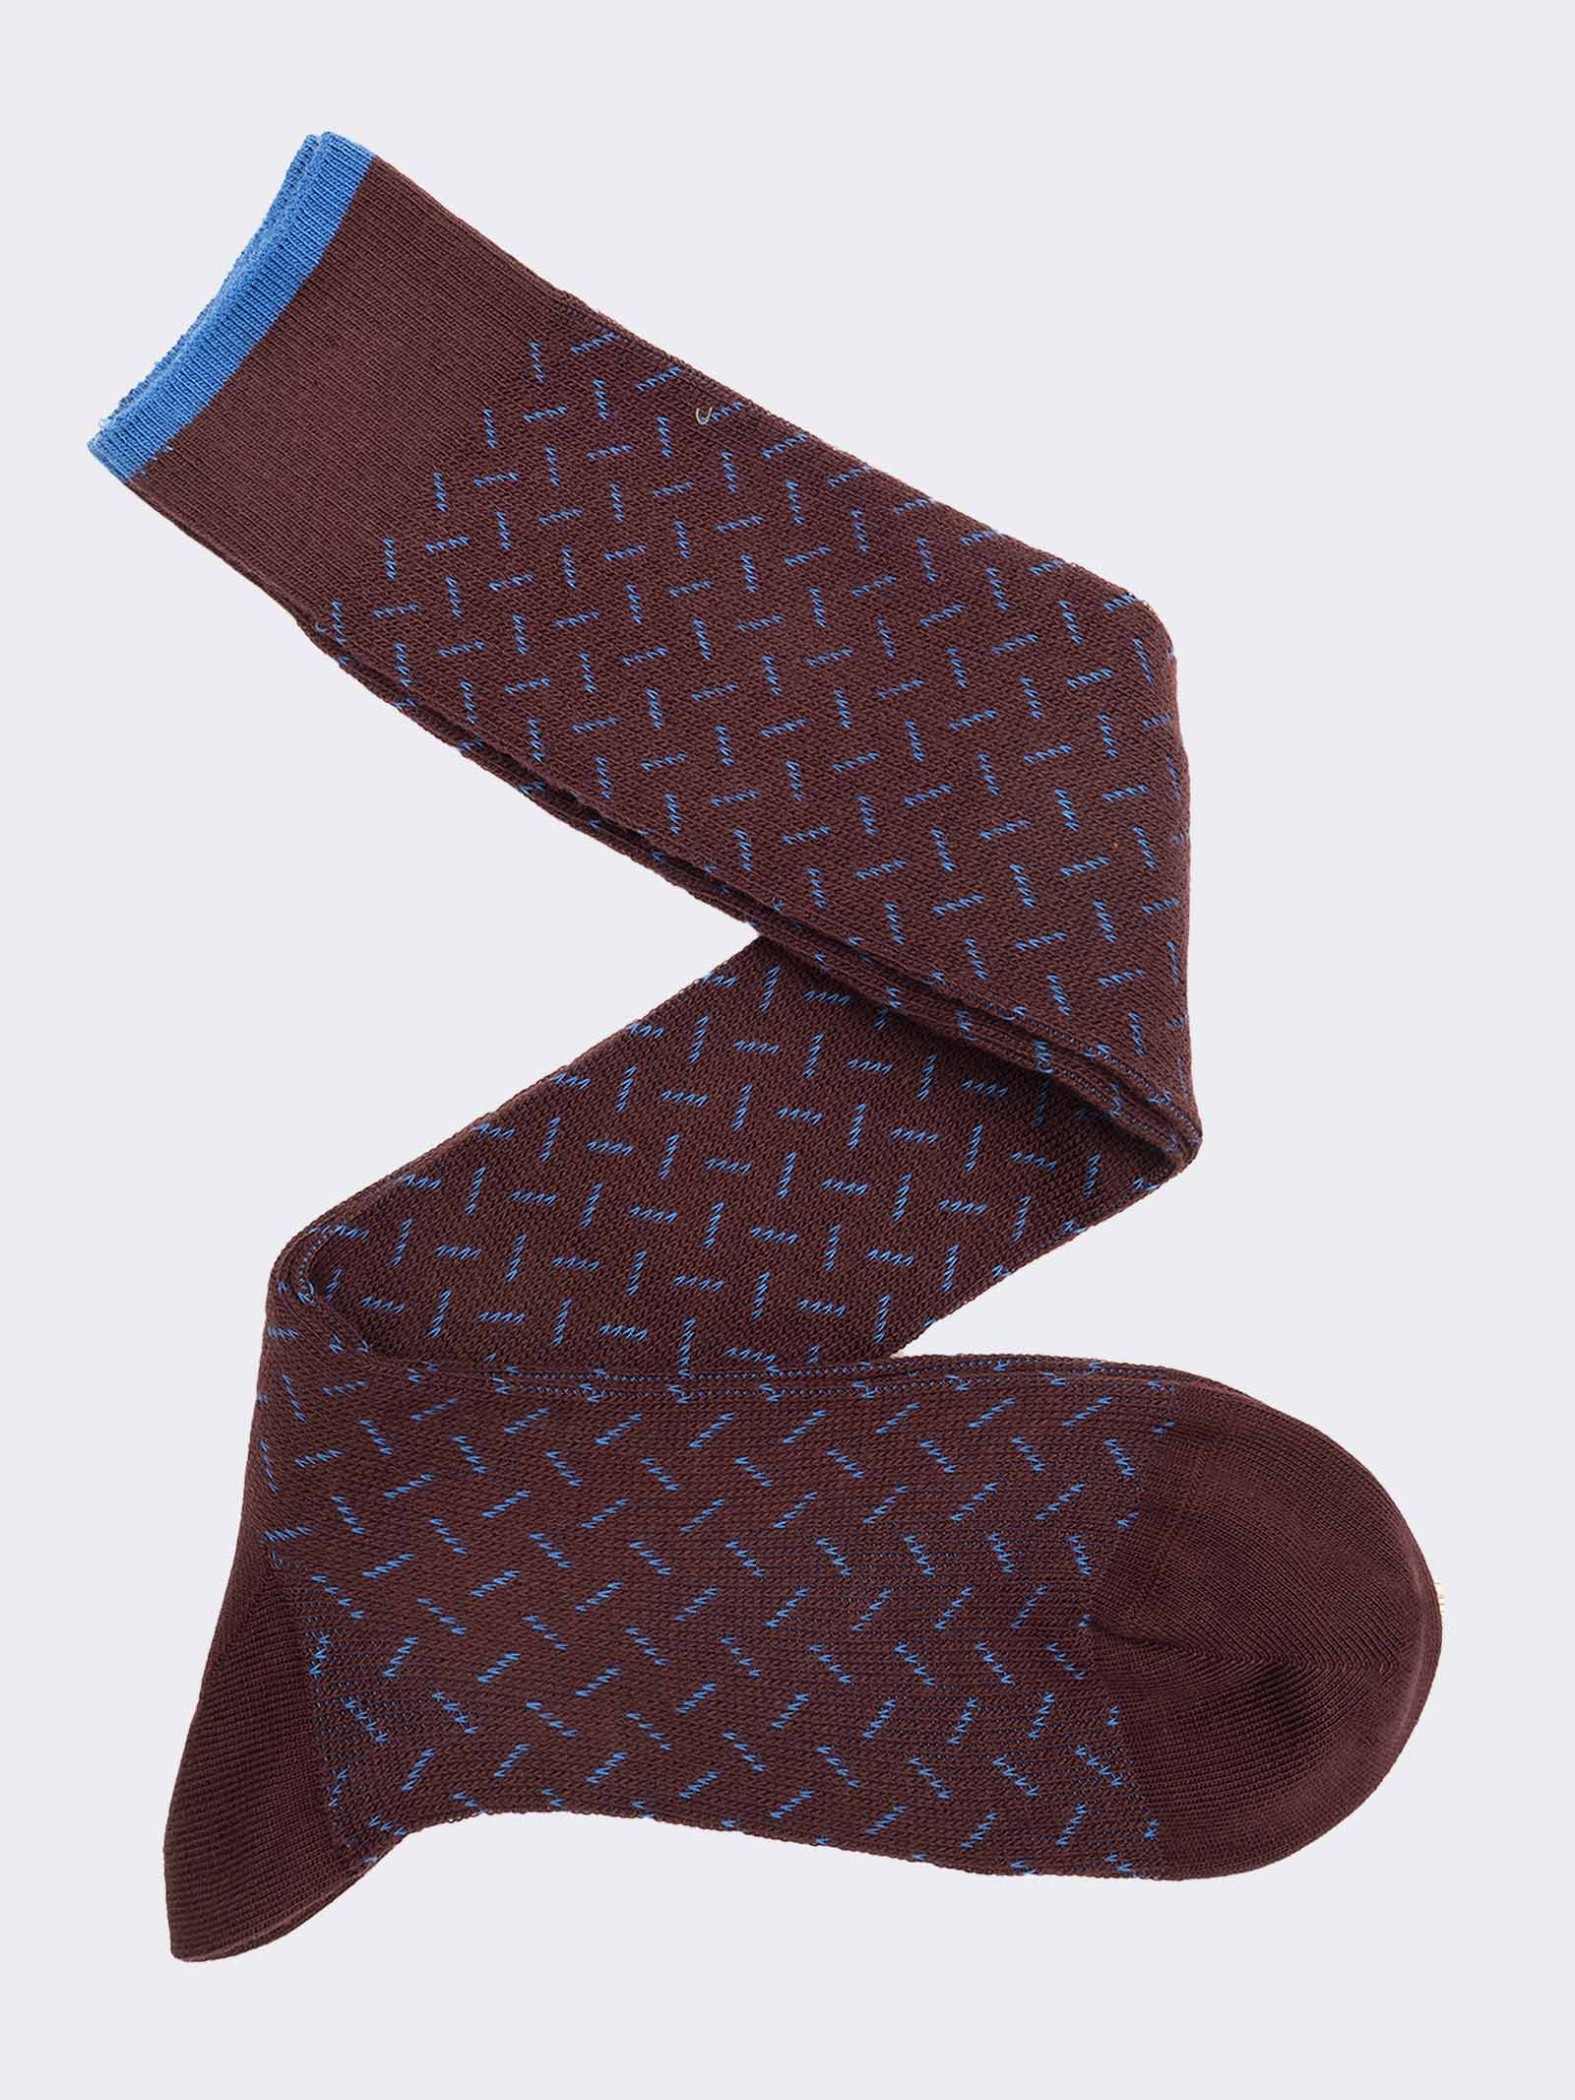 Men's patterned Knee high socks in warm cotton - Made in Italy